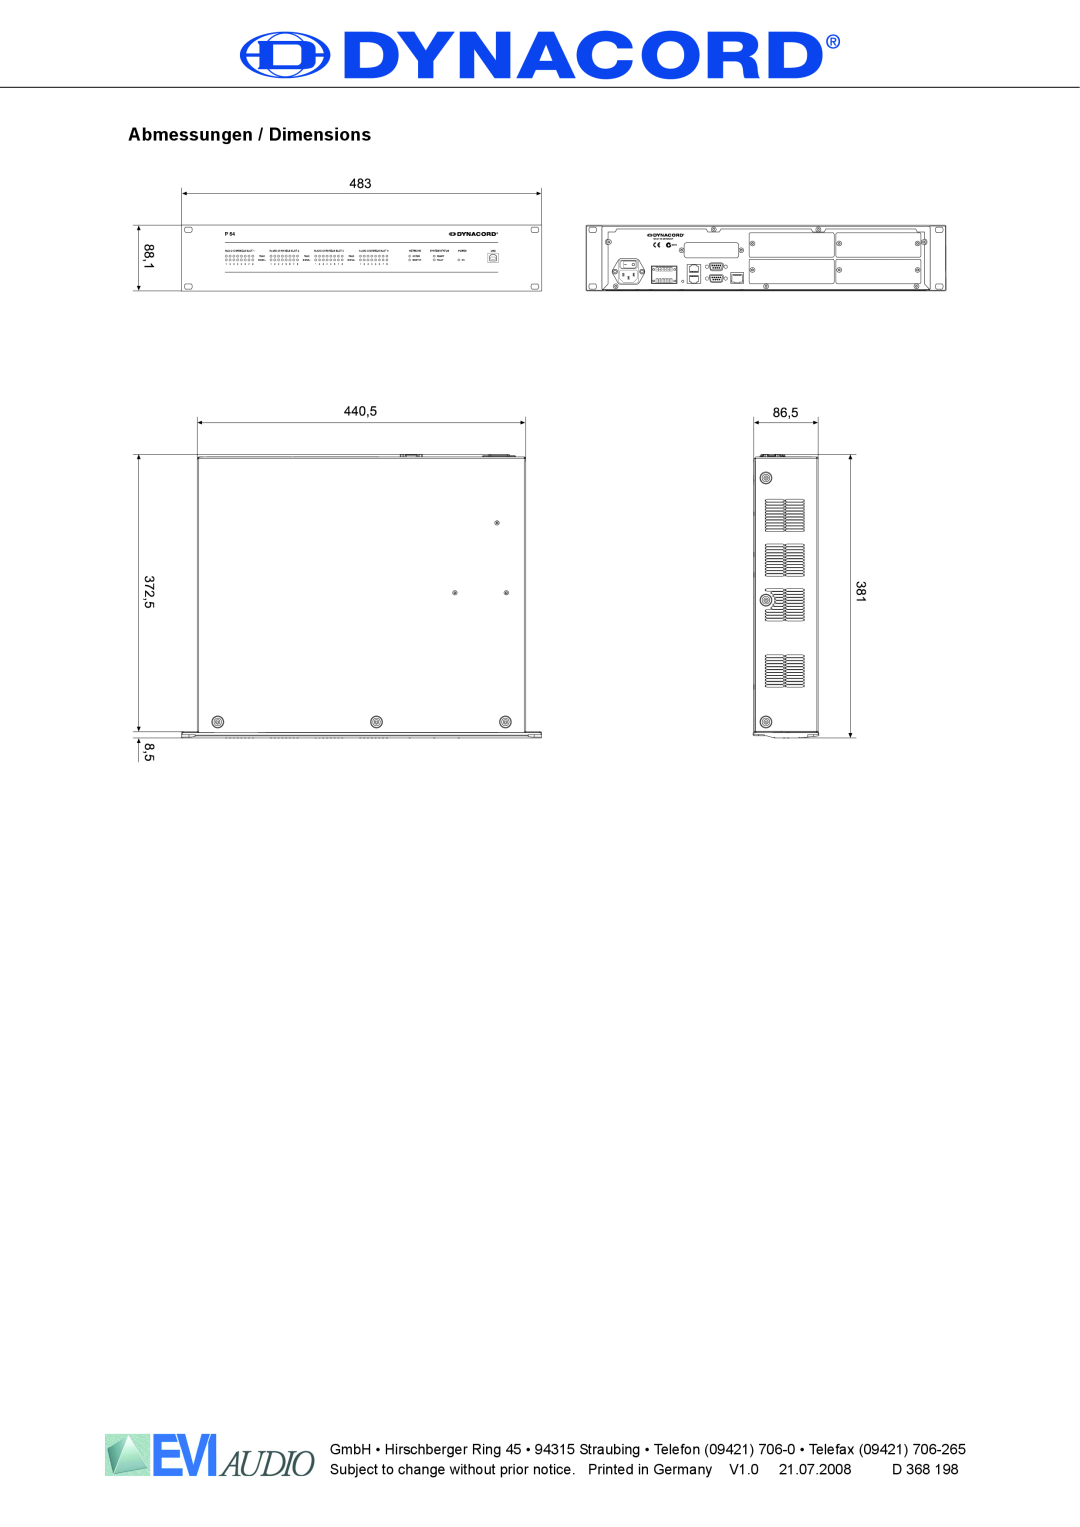 Dynacord P 64 user manual Abmessungen / Dimensions 